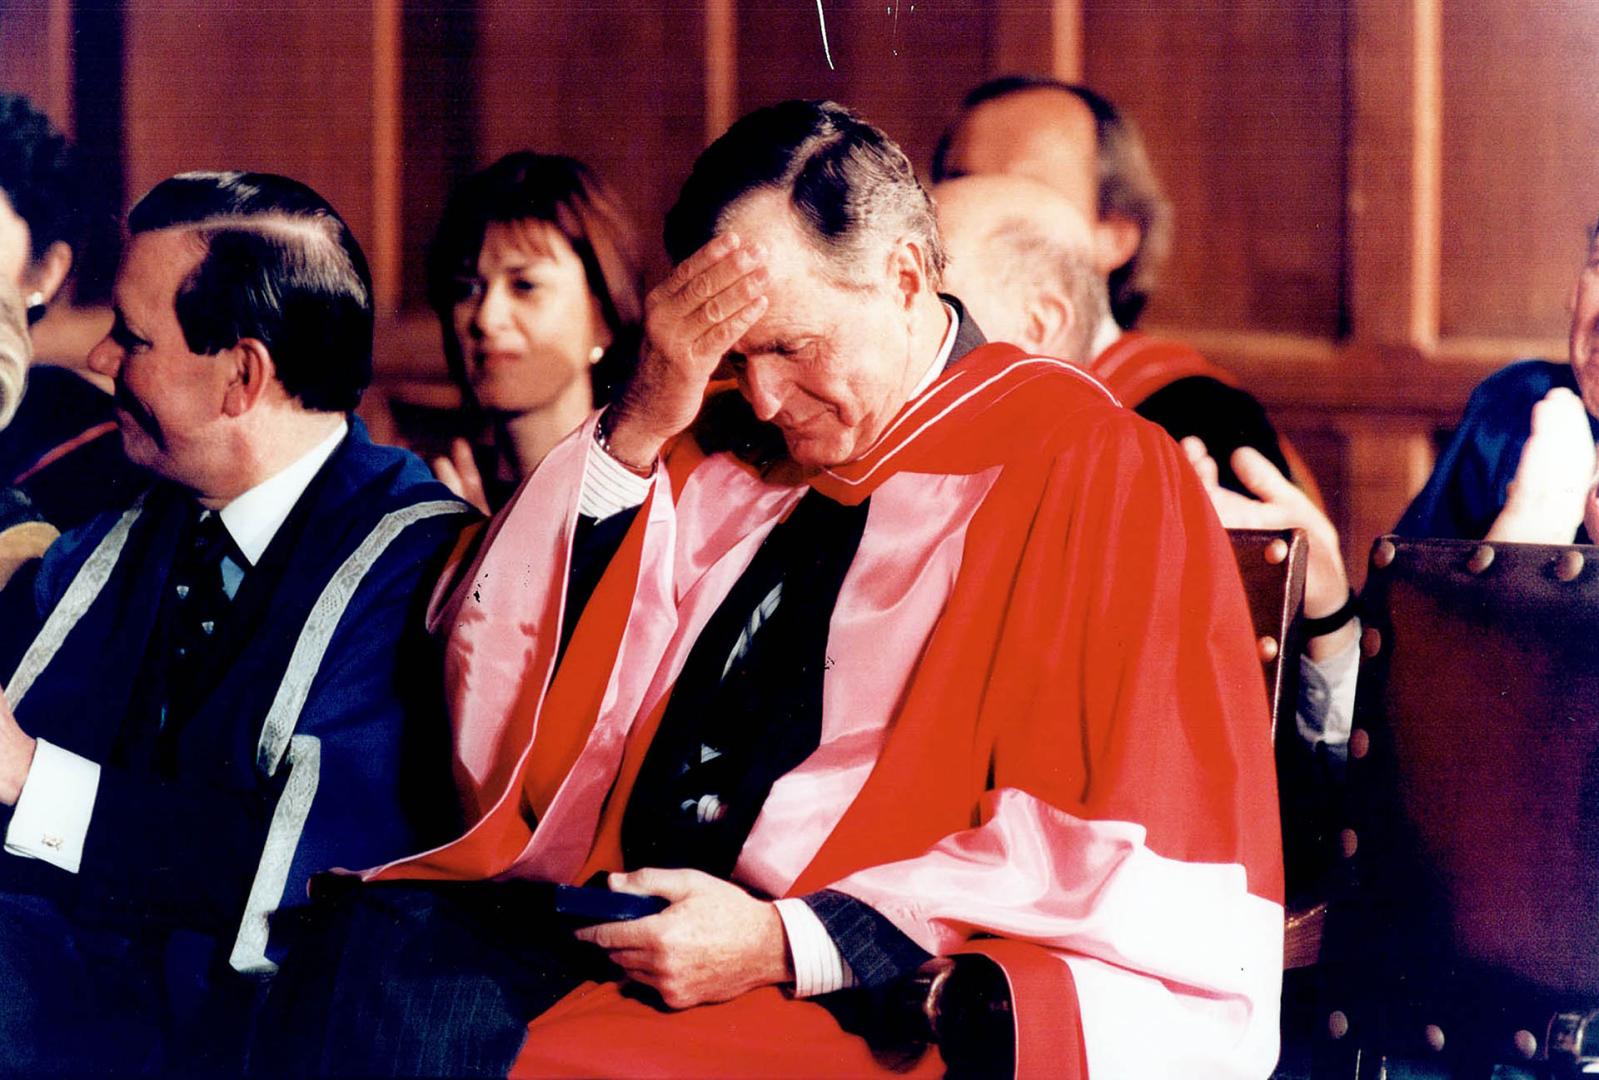 Receiving D. of Law at U of T